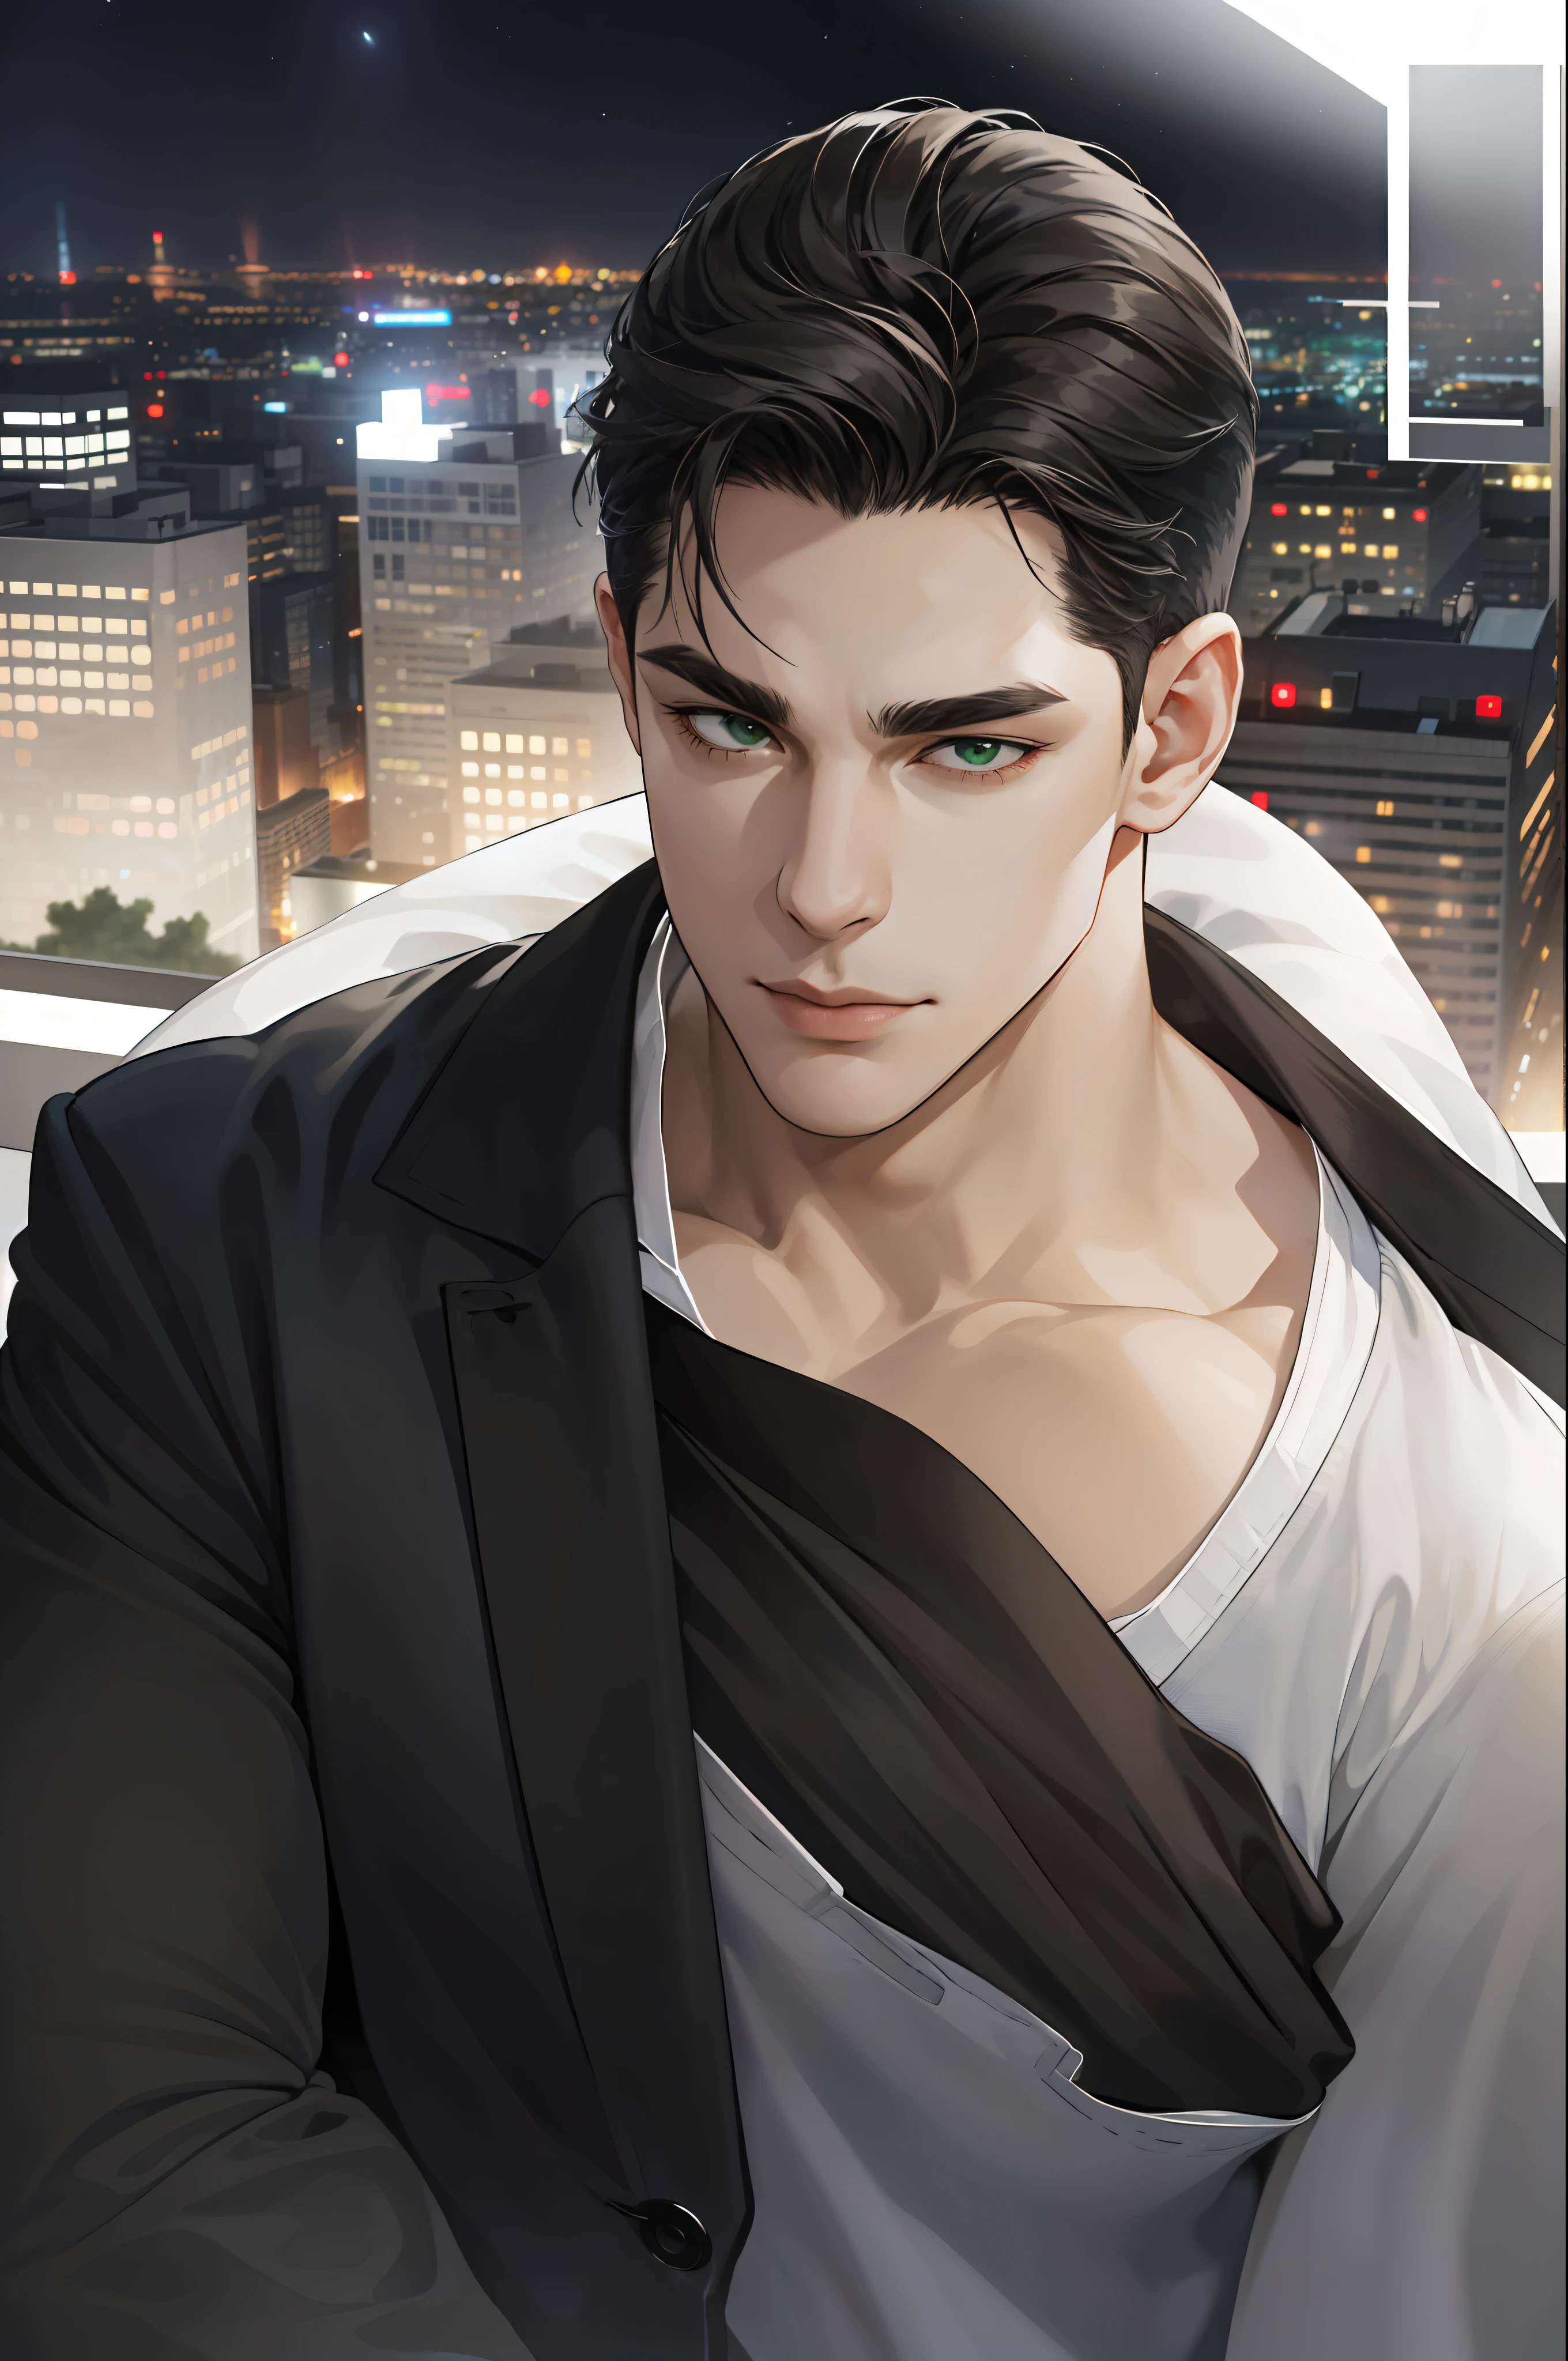 (absurd, hd, super detailed), (1 male, single, adult, mature: 1.4, age: 1.4, tall, handsome), fine eye and face portrayal, extremely short hair, black hair, hair oil, distinct hair, green eyes, (pointed chin: 1.4, thick neck: 1.4, thick eyebrows: 1.4), BREAK, night, dark, night view of the city through large windows, shirt, suit, break, upper body,